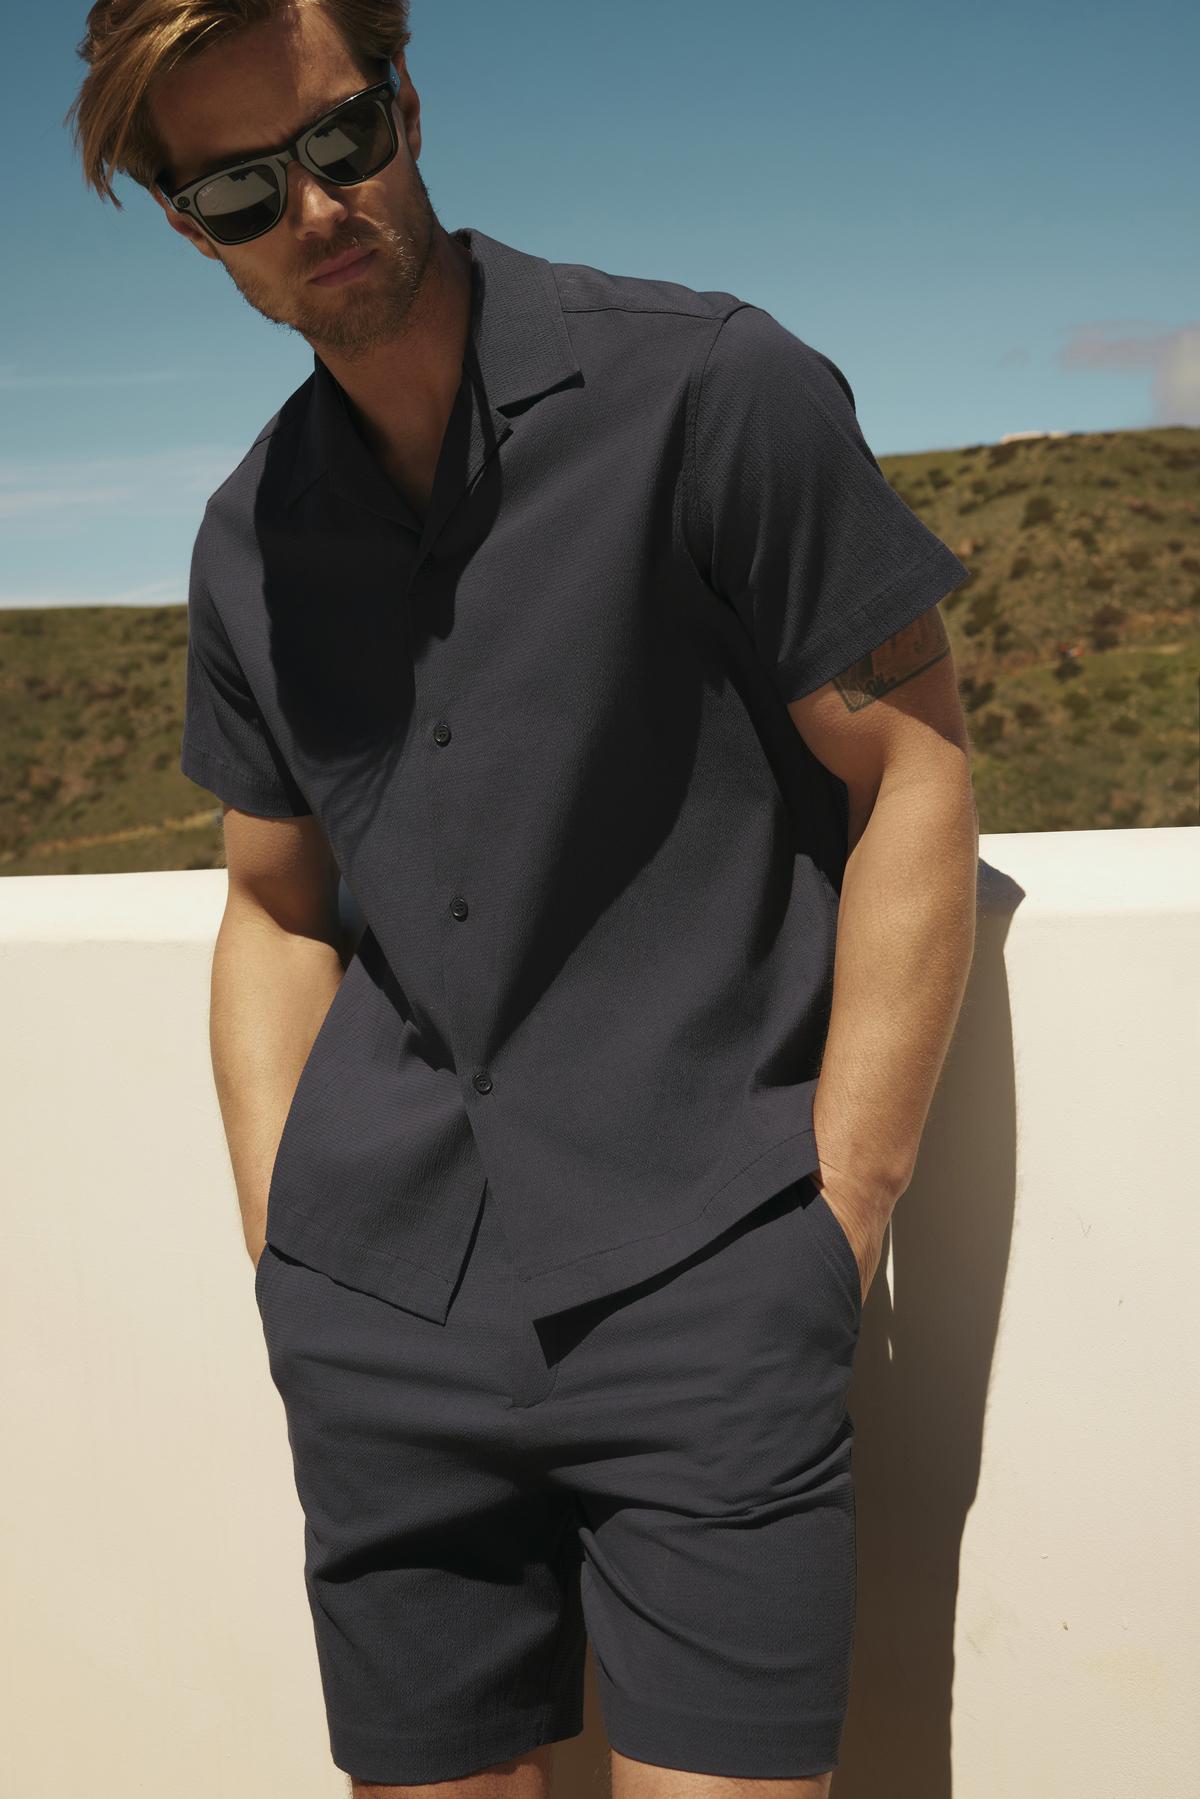   A man in sunglasses, wearing a FRANK BUTTON-UP SHIRT by Velvet by Graham & Spencer and shorts, stands against a sunlit outdoor backdrop with hills. 